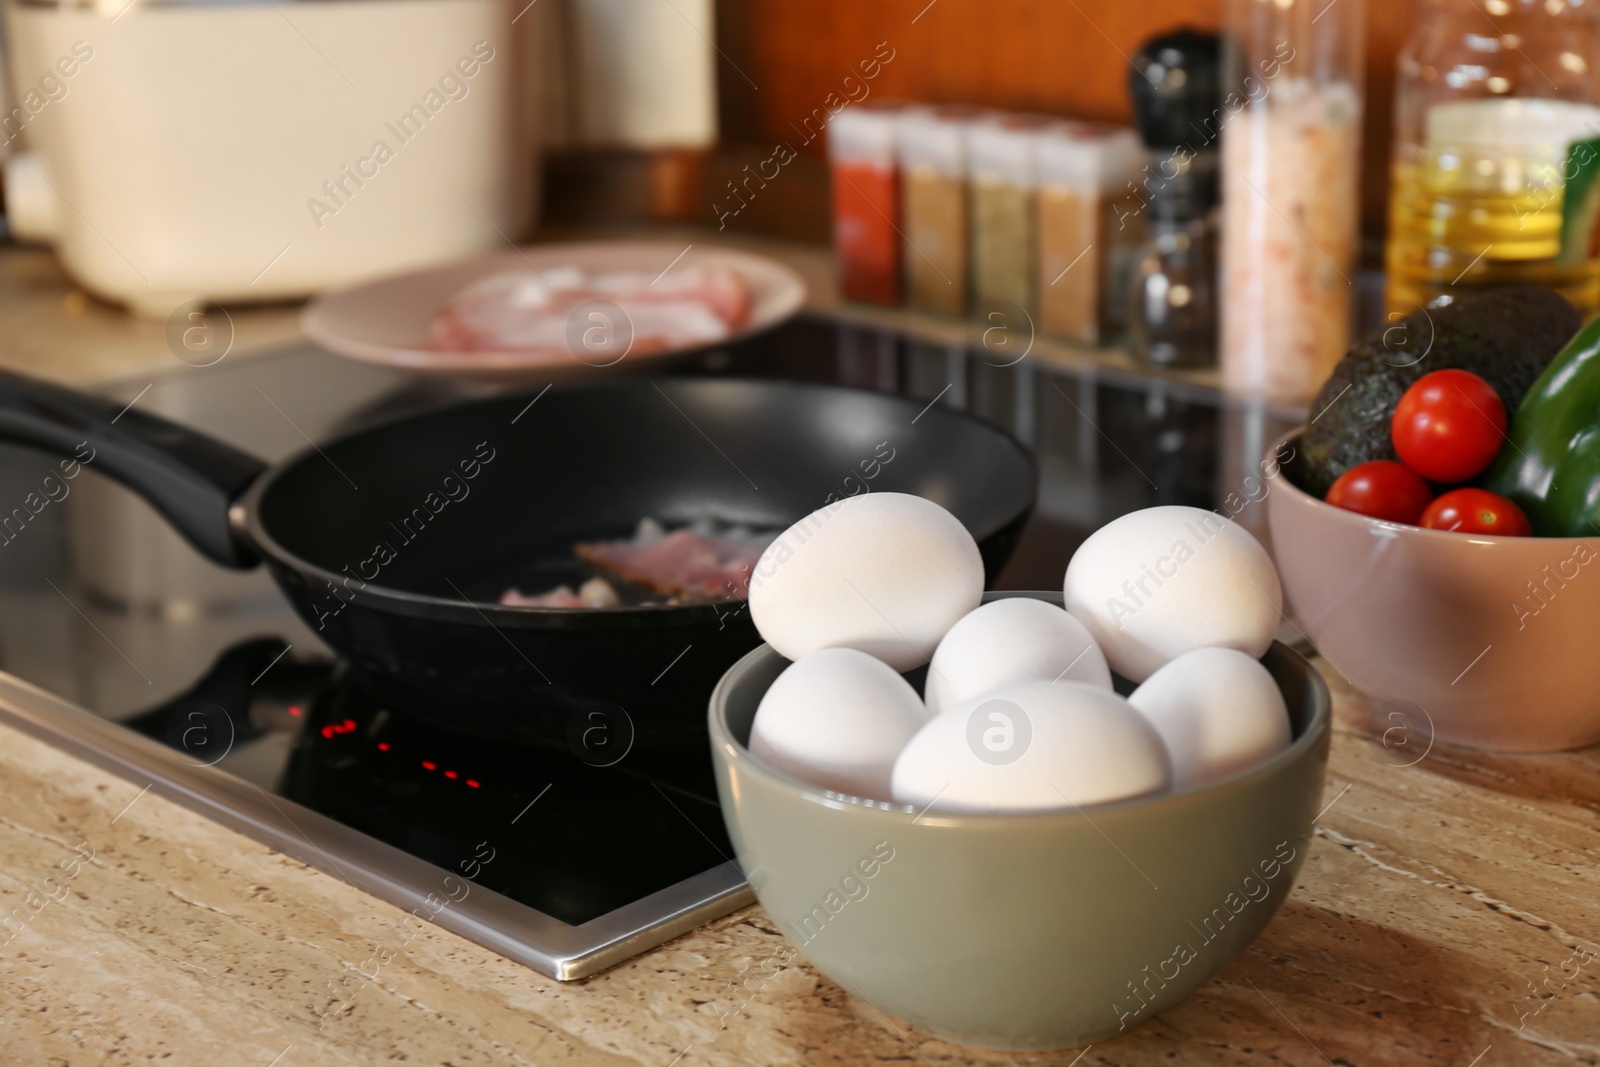 Photo of Many fresh eggs on wooden countertop in kitchen. Frying bacon for breakfast